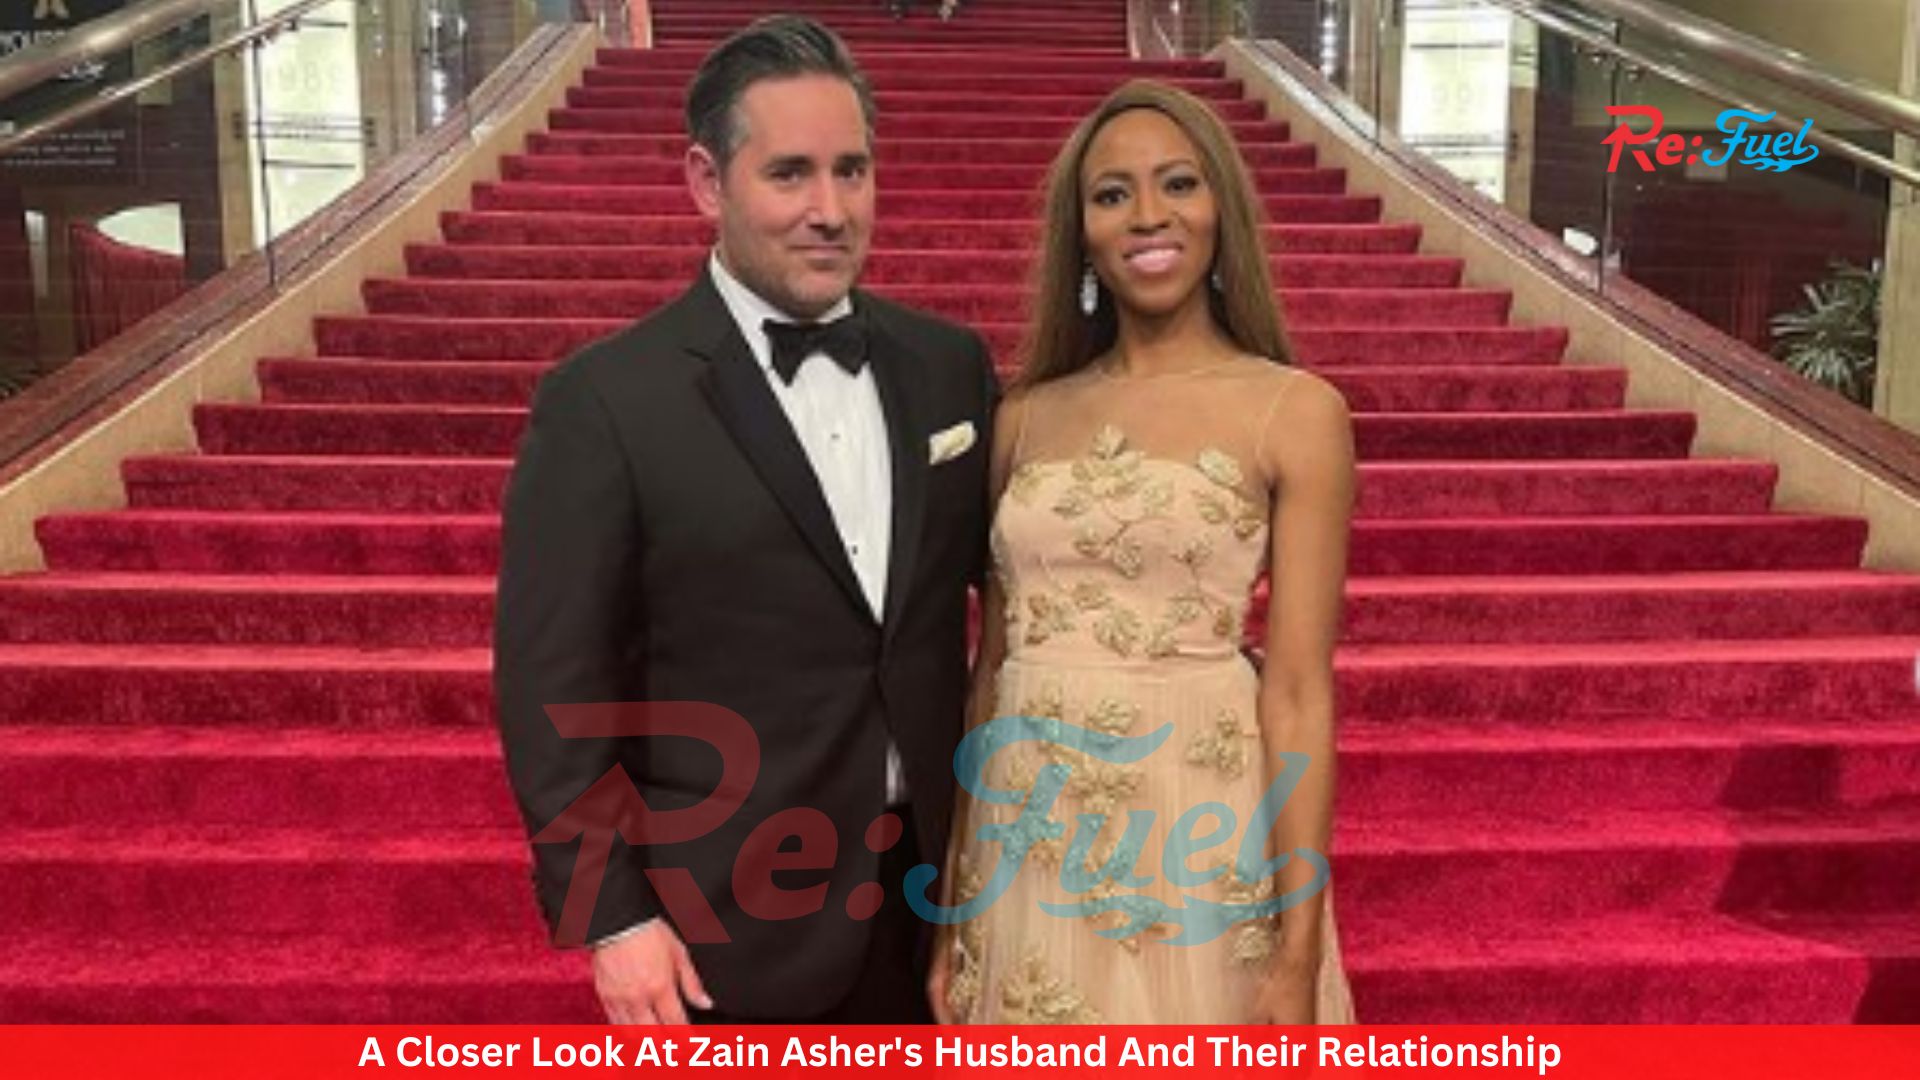 A Closer Look At Zain Asher's Husband And Their Relationship